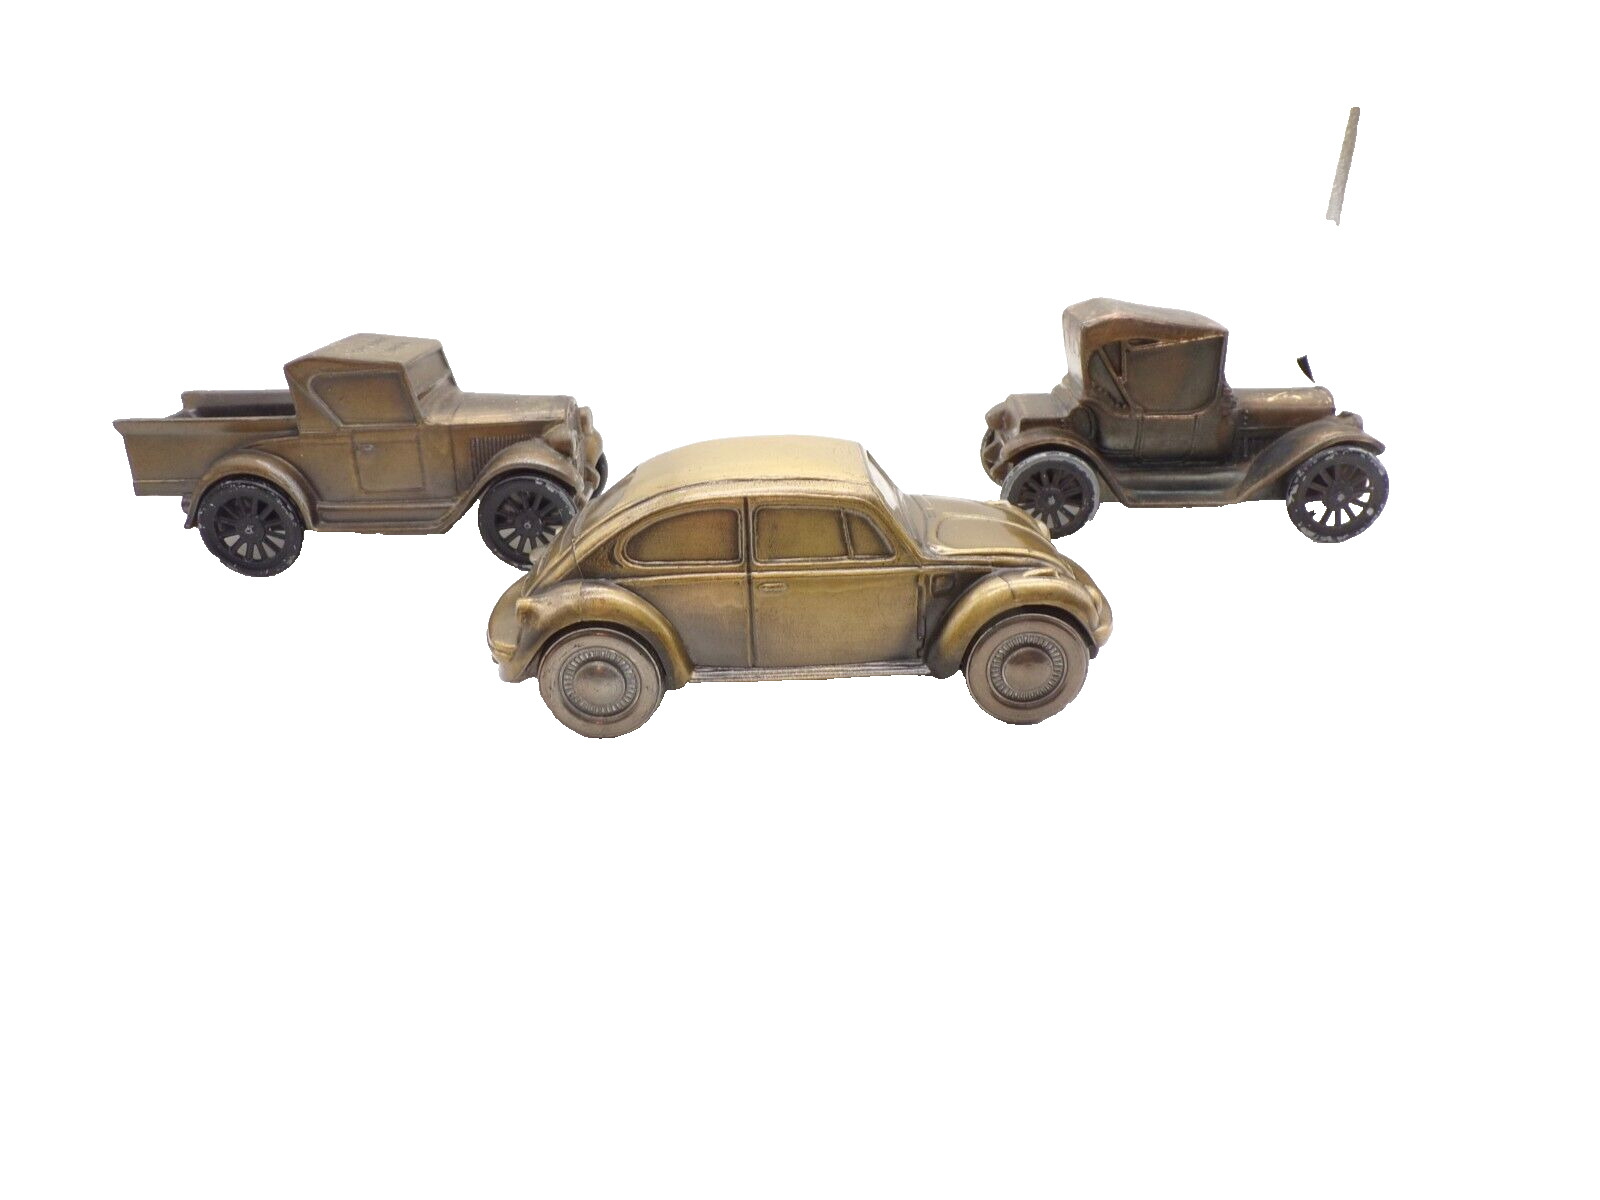 3 Banthrico Metal Car Coin Banks 1977 VW 1928 Chevy Pickup Truck 1915 Chevy